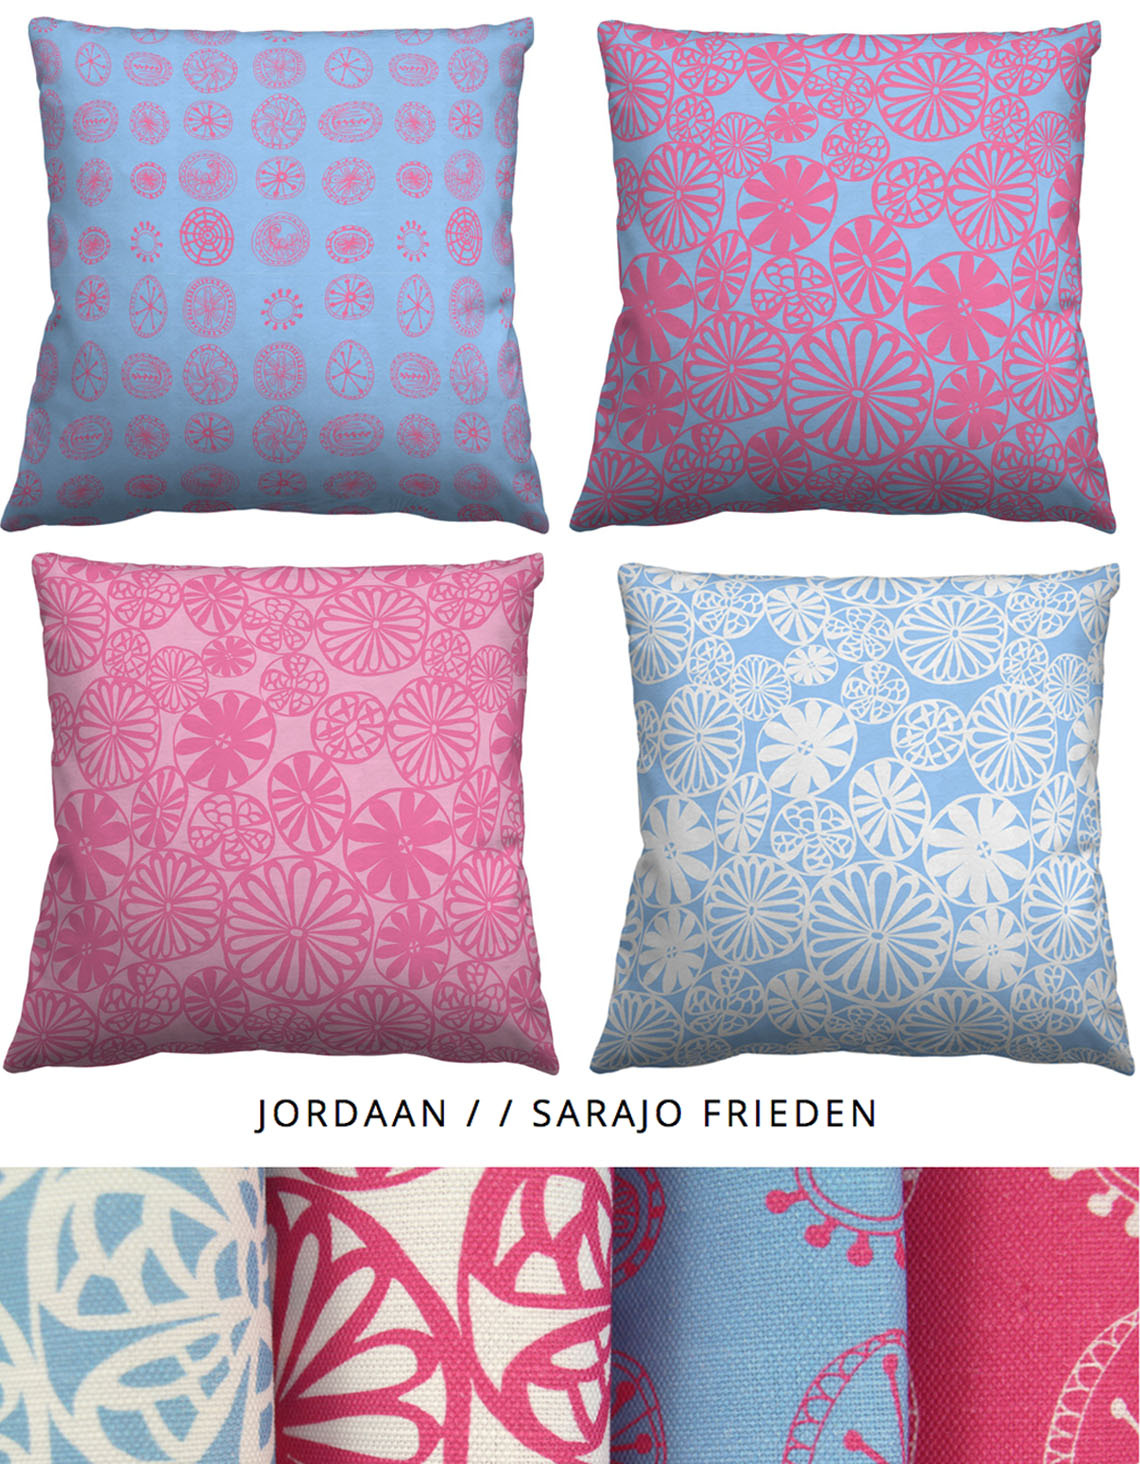 New for 2015! My third collection launched Jordaan collection for Guildery